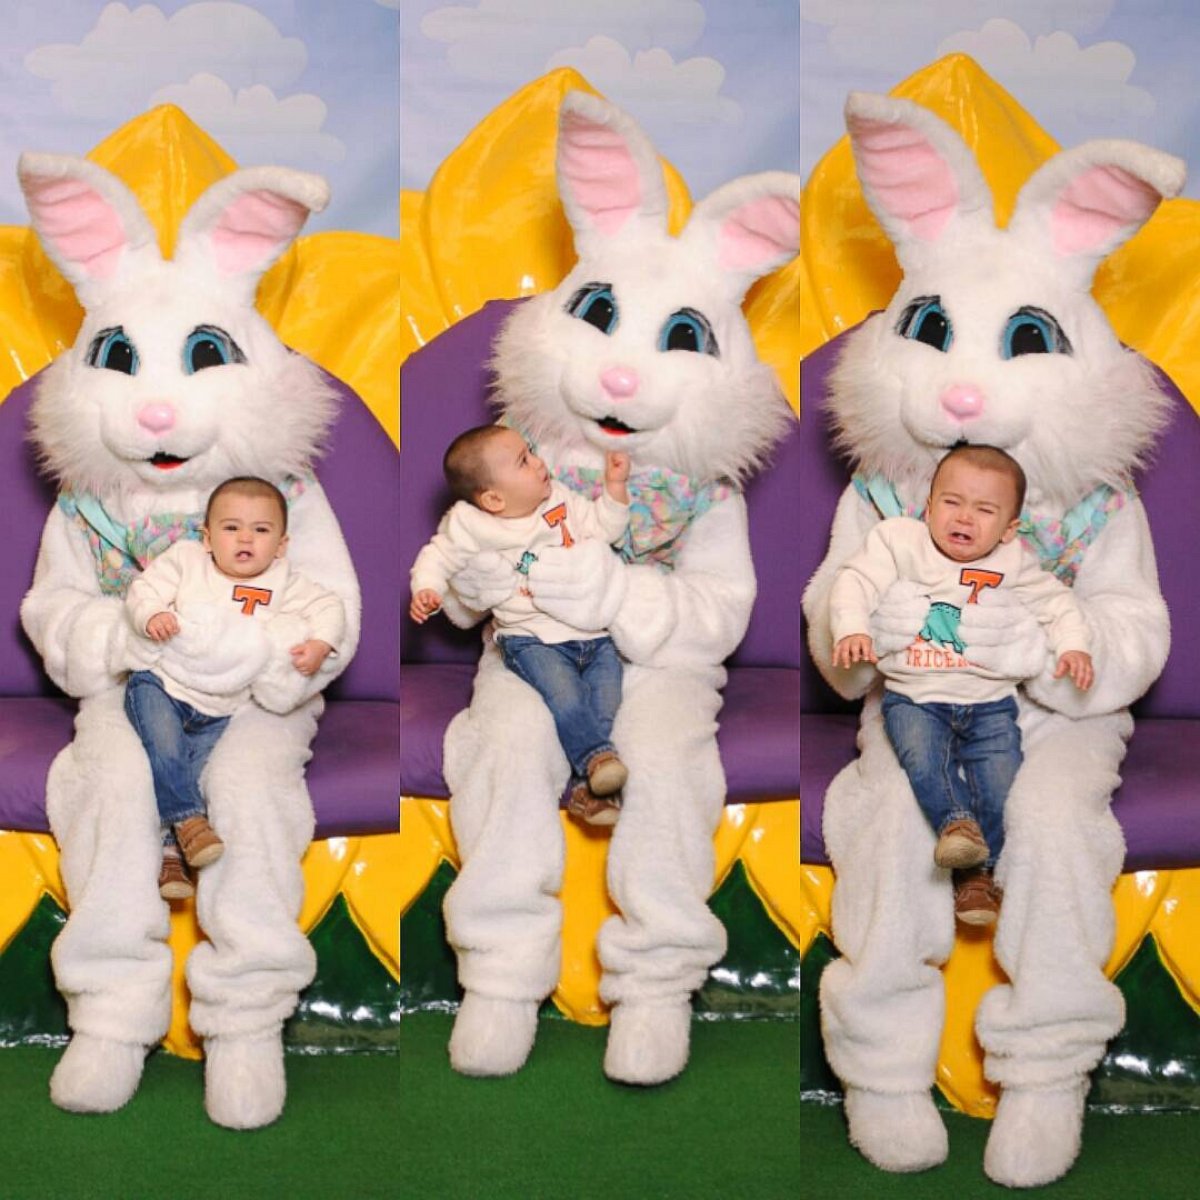 PHOTO: Kids Absolutely Terrified of the Easter Bunny